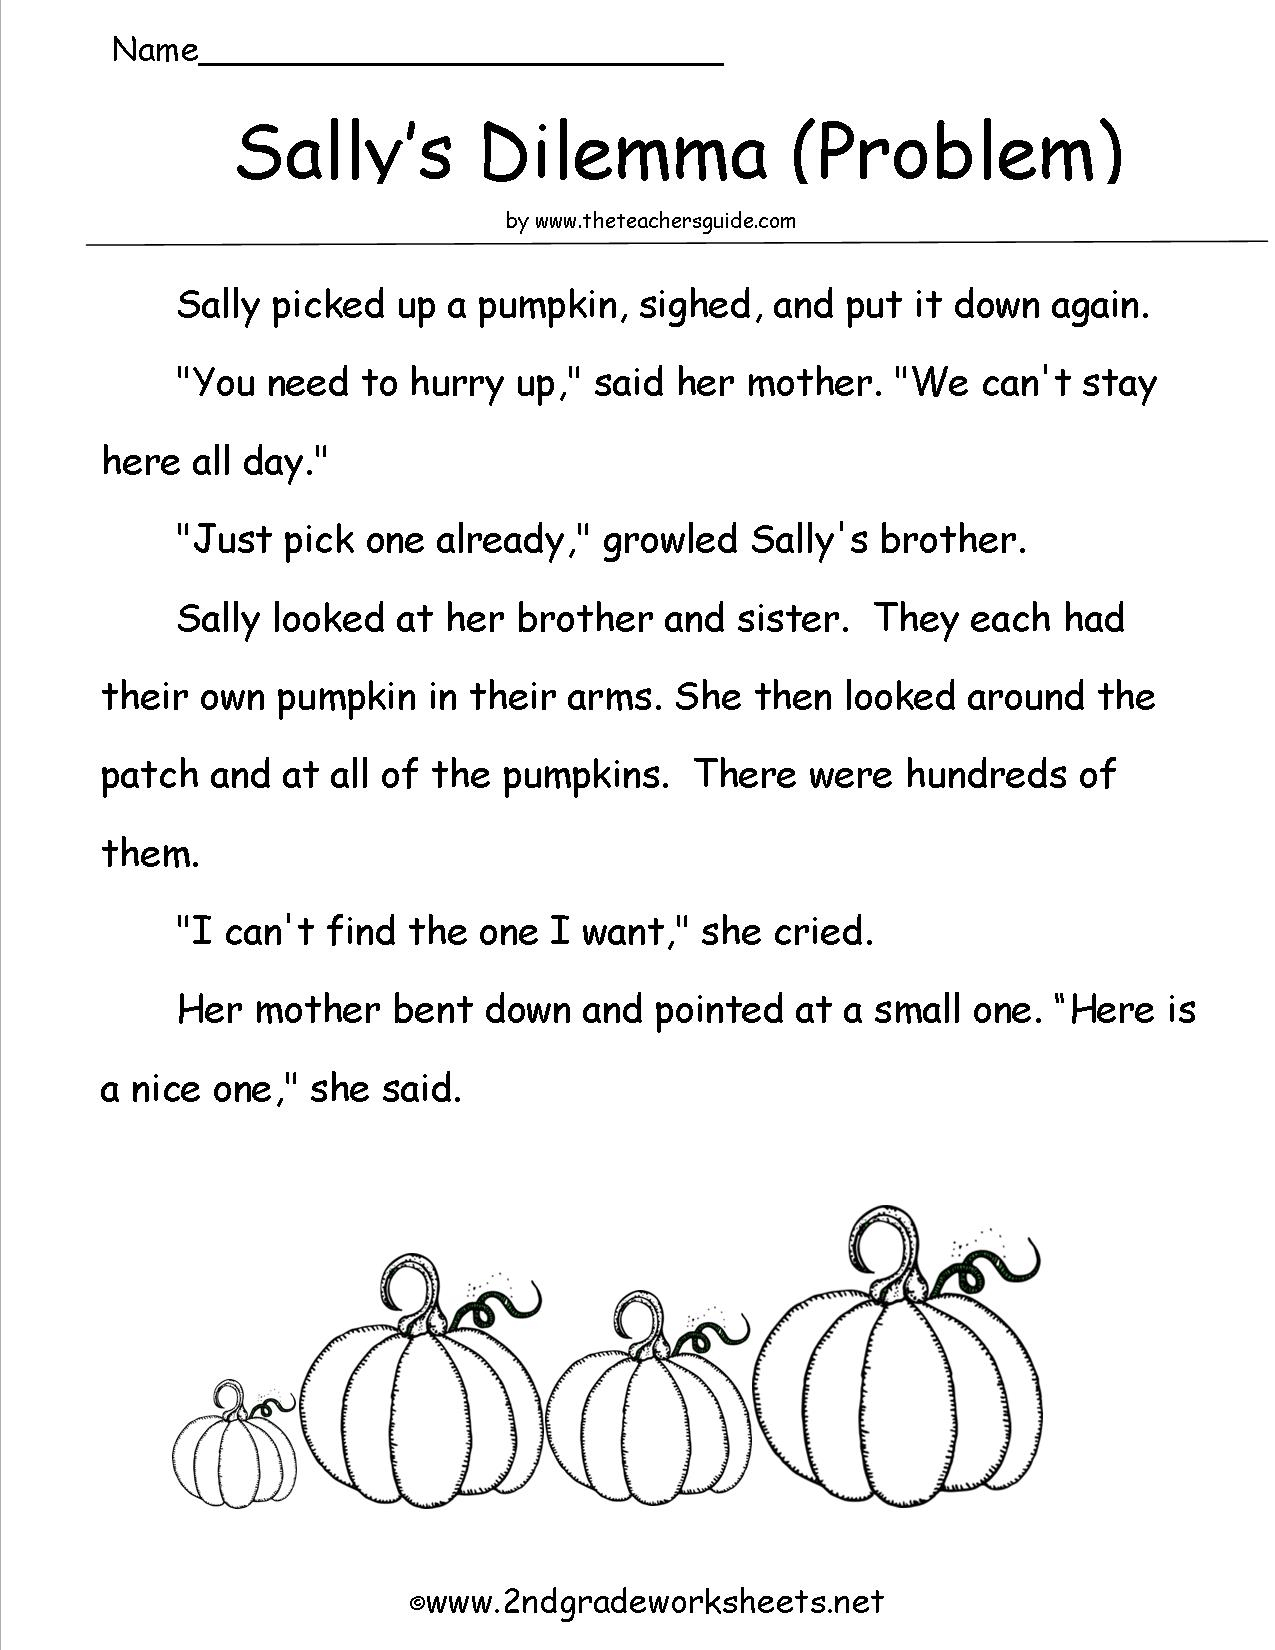 Halloween Worksheets And Printouts - Free Printable Halloween Worksheets